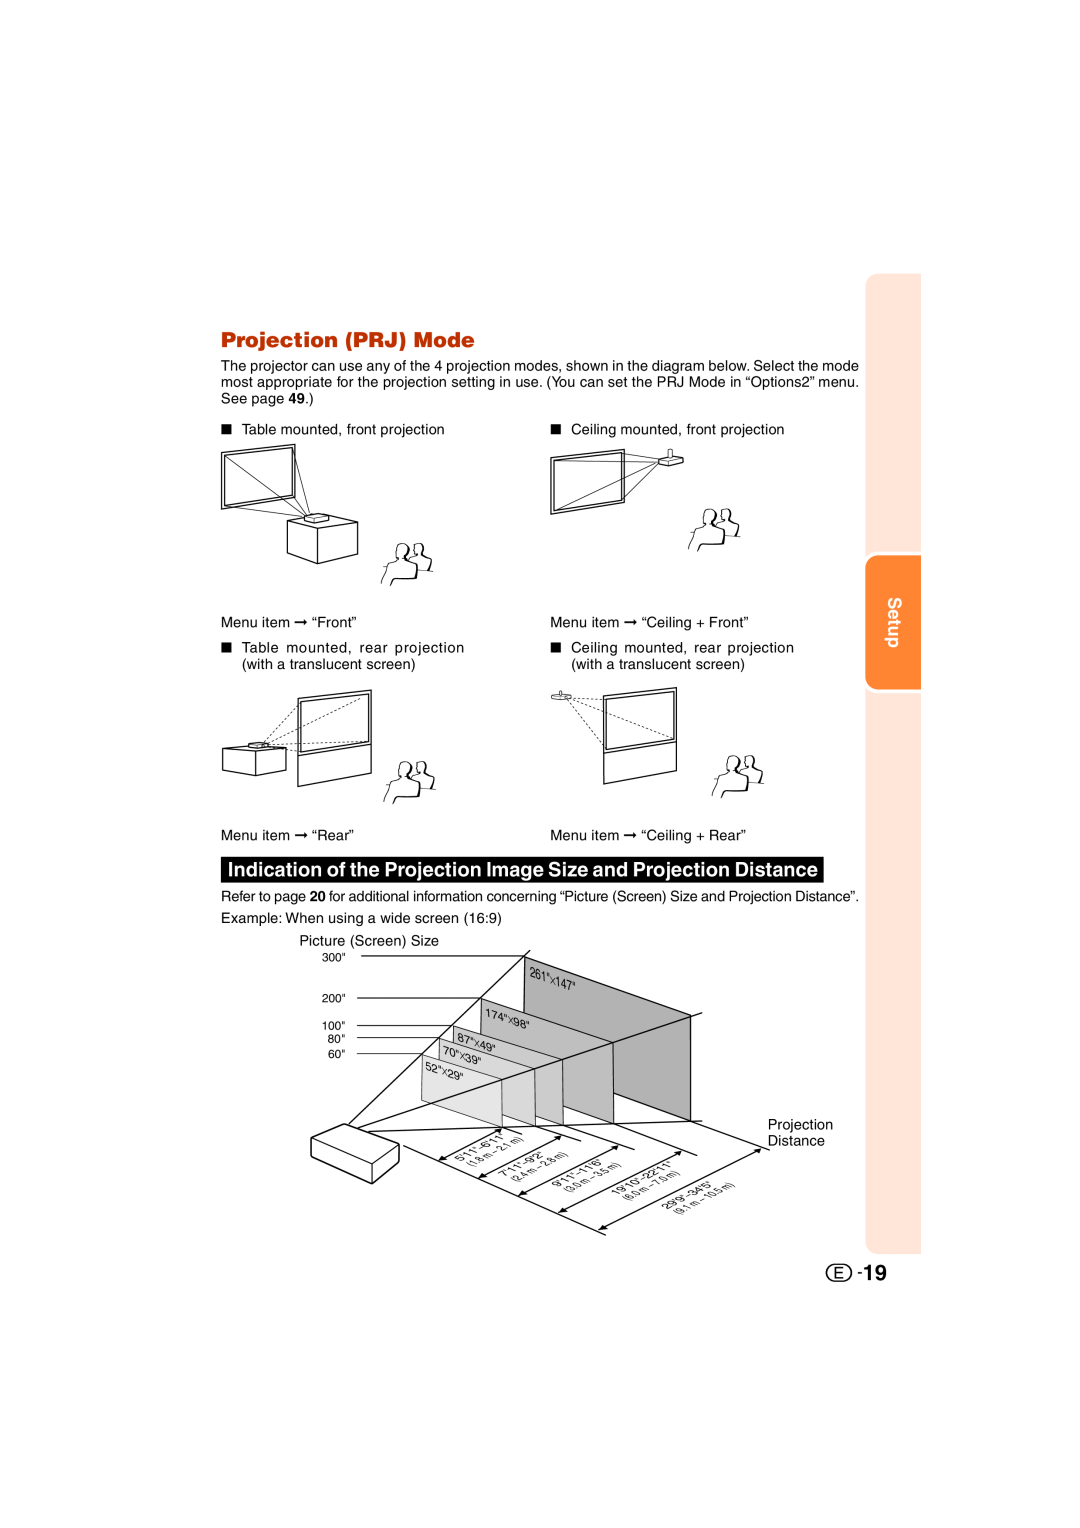 Sharp XV-Z3000U Projection PRJ Mode, Indication of the Projection Image Size and Projection Distance, Setup 